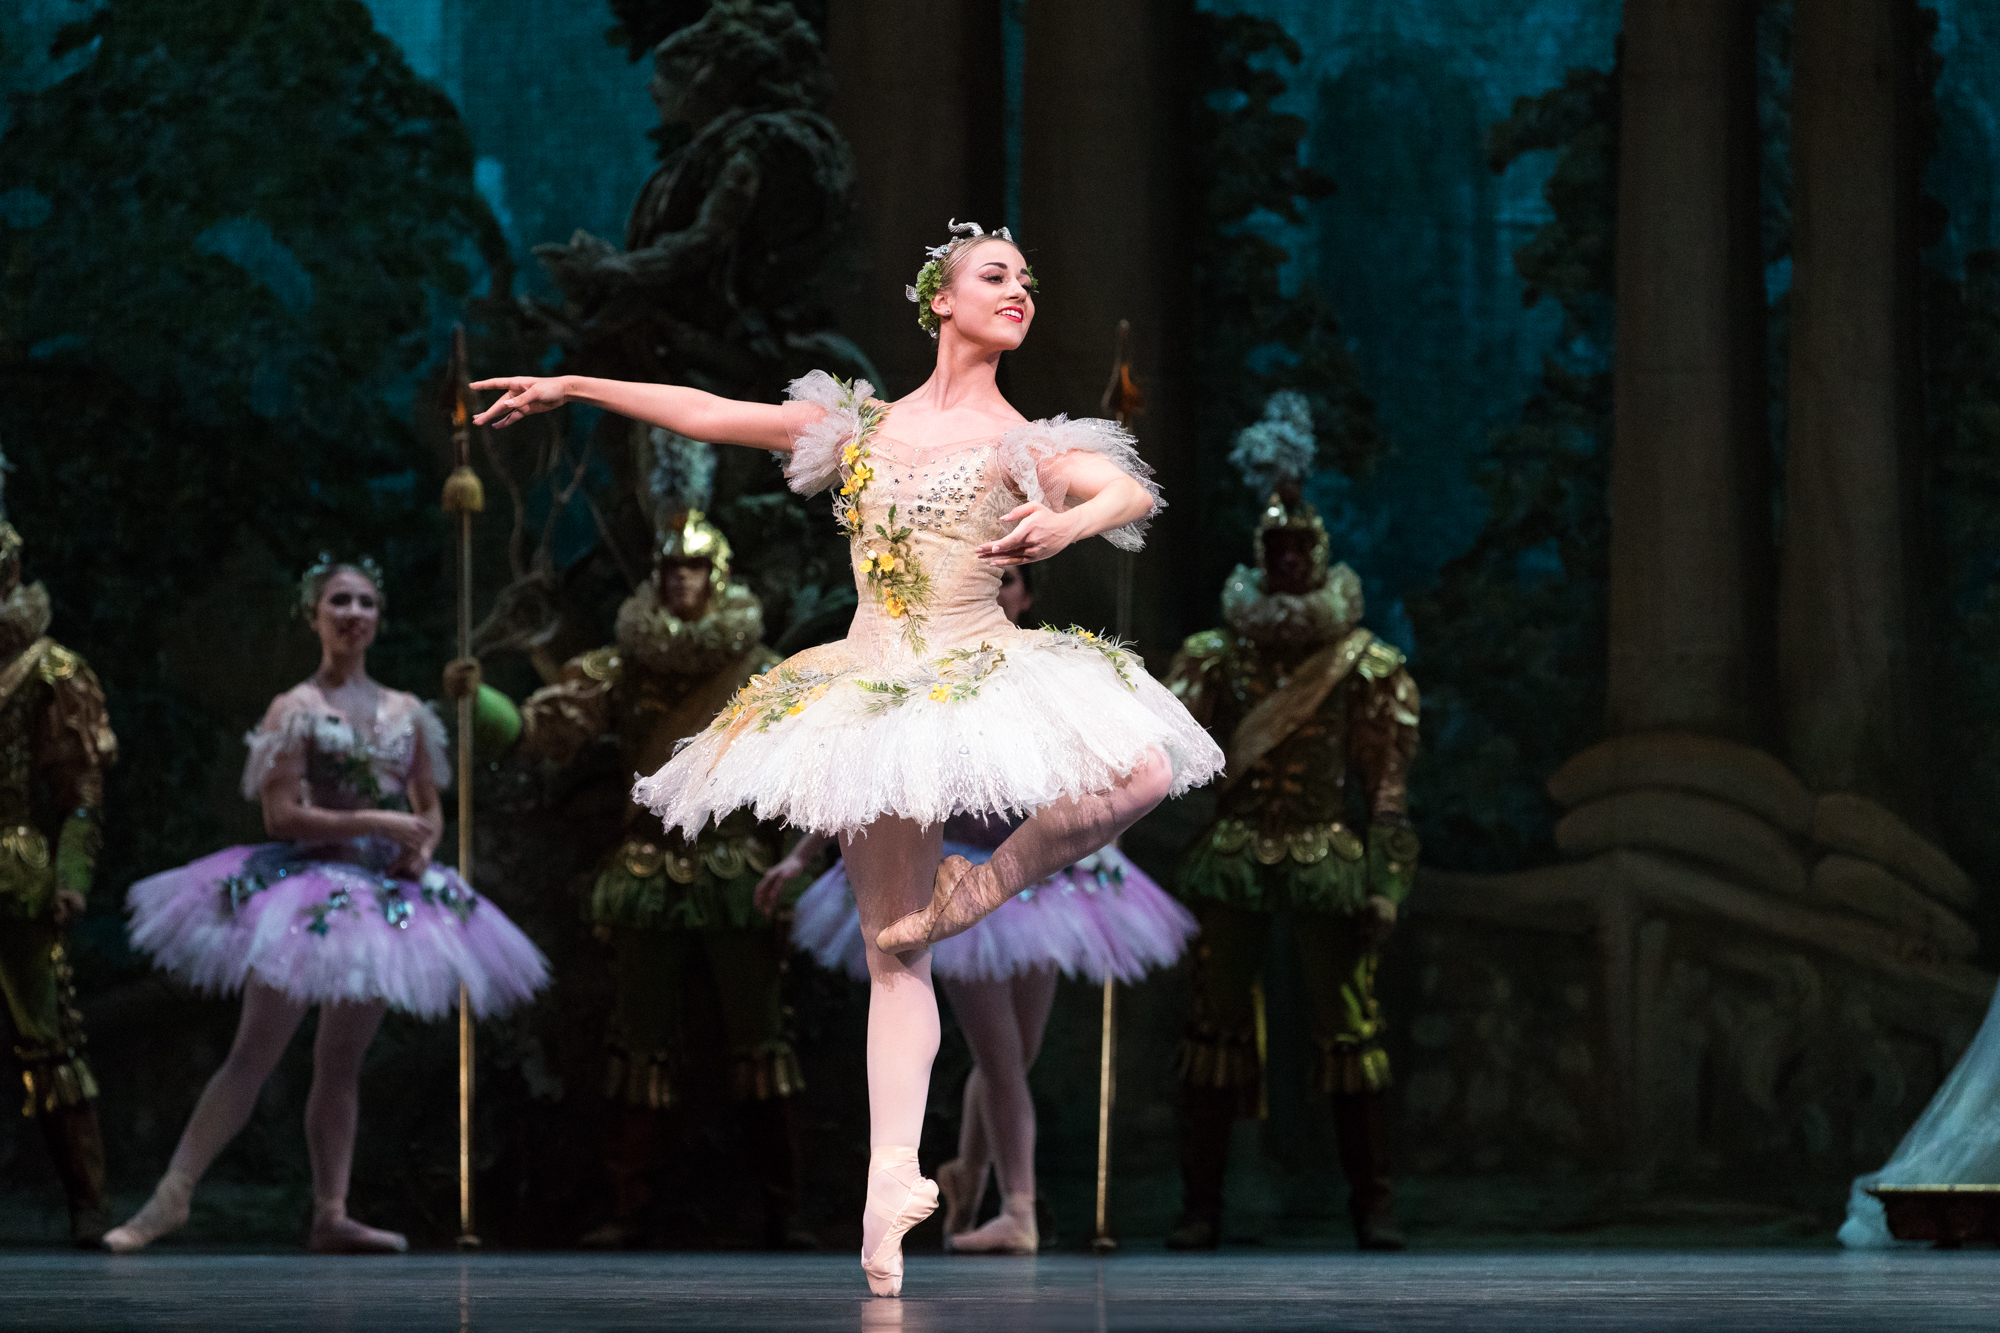 Tyler Donatelli balances onstage in retiré on pointe in a tutu and pointe shoes.